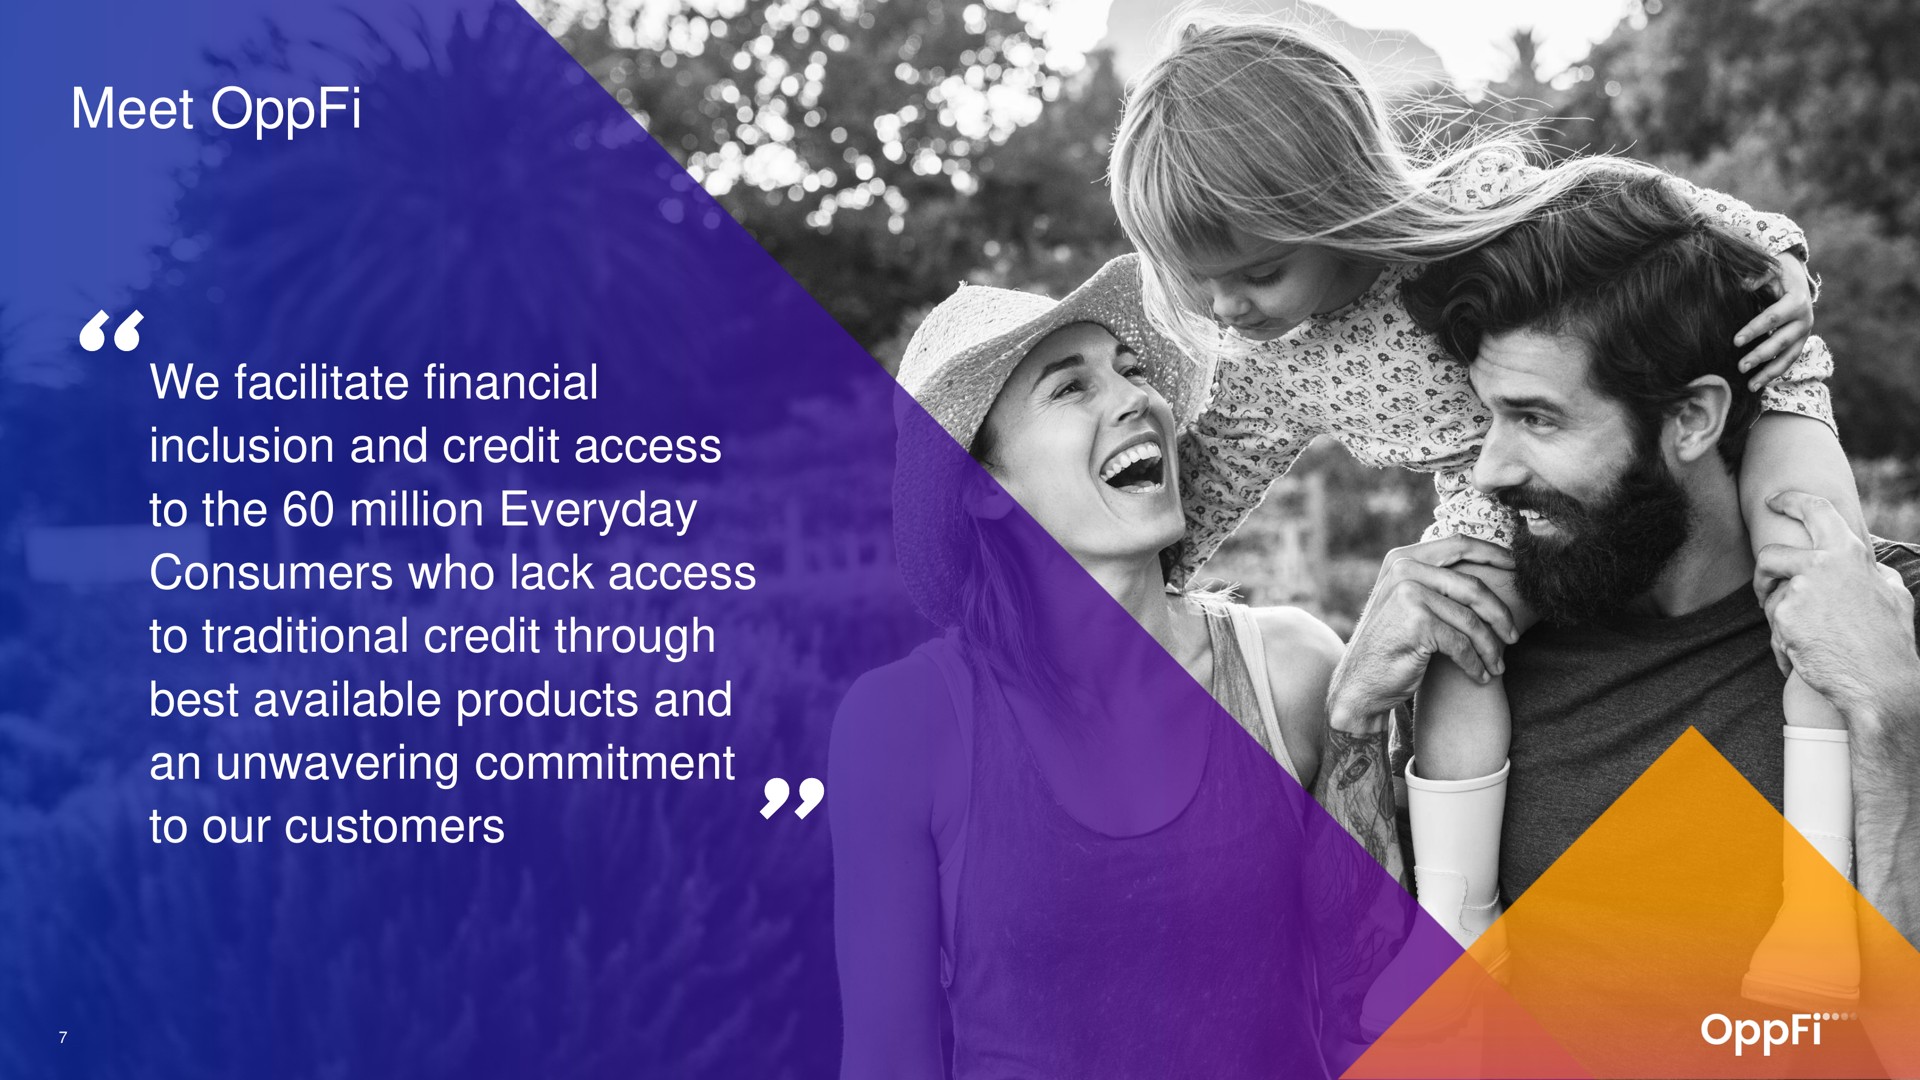 meet we facilitate financial inclusion and credit access to the million everyday consumers who lack access to traditional credit through best available products and an unwavering commitment to our customers i | OppFi